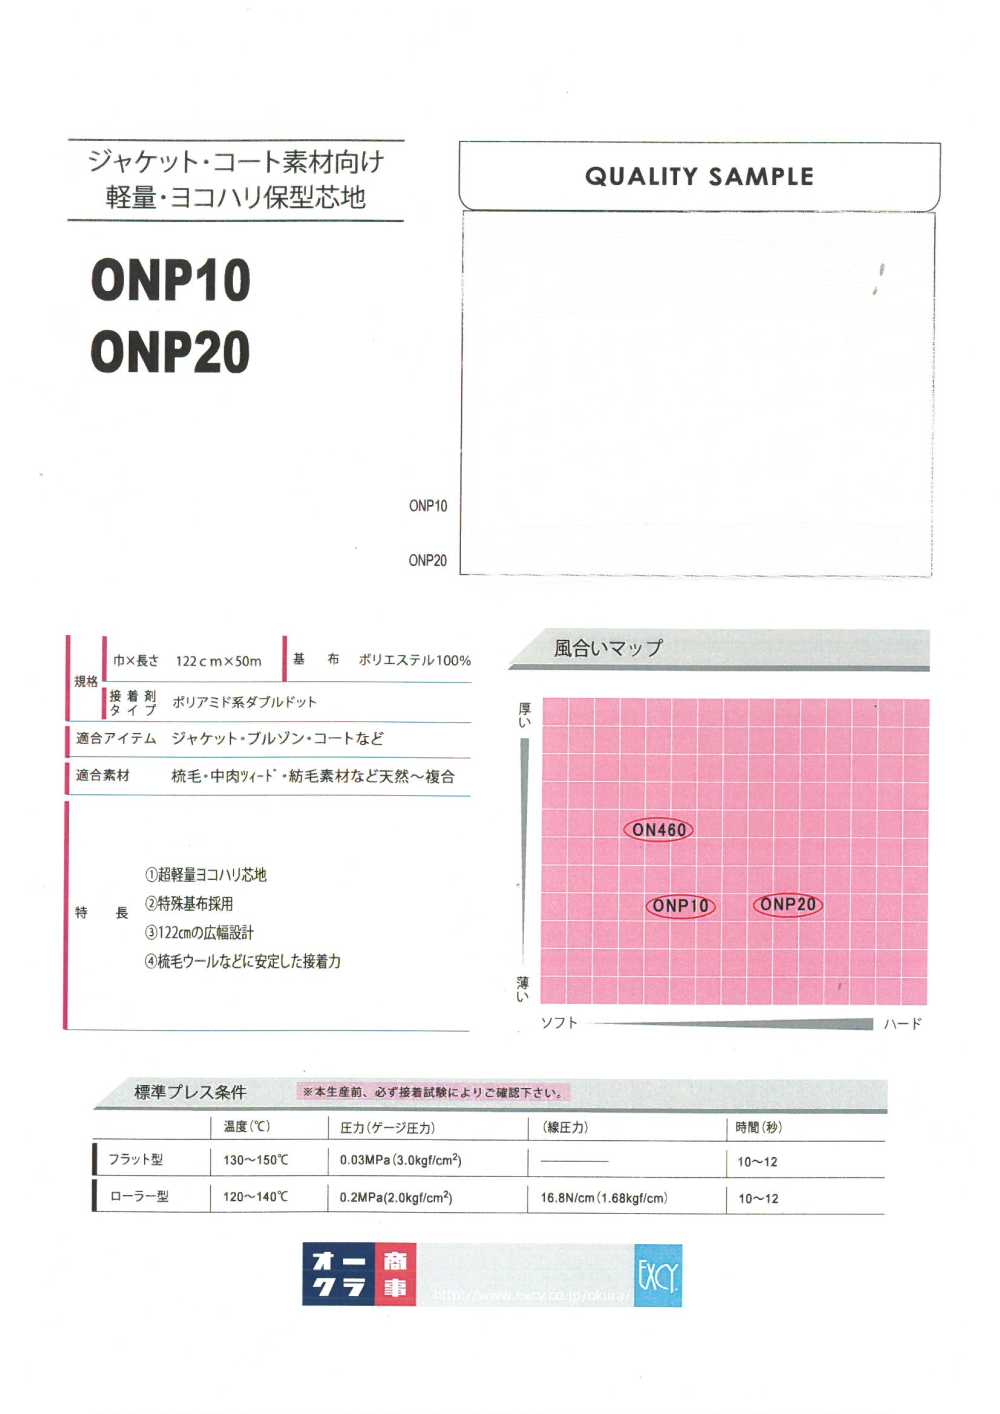 ONP20 Light-weight, Horizontal, Shape-retaining Interlining For Jackets And Coats 20D×75D*30D